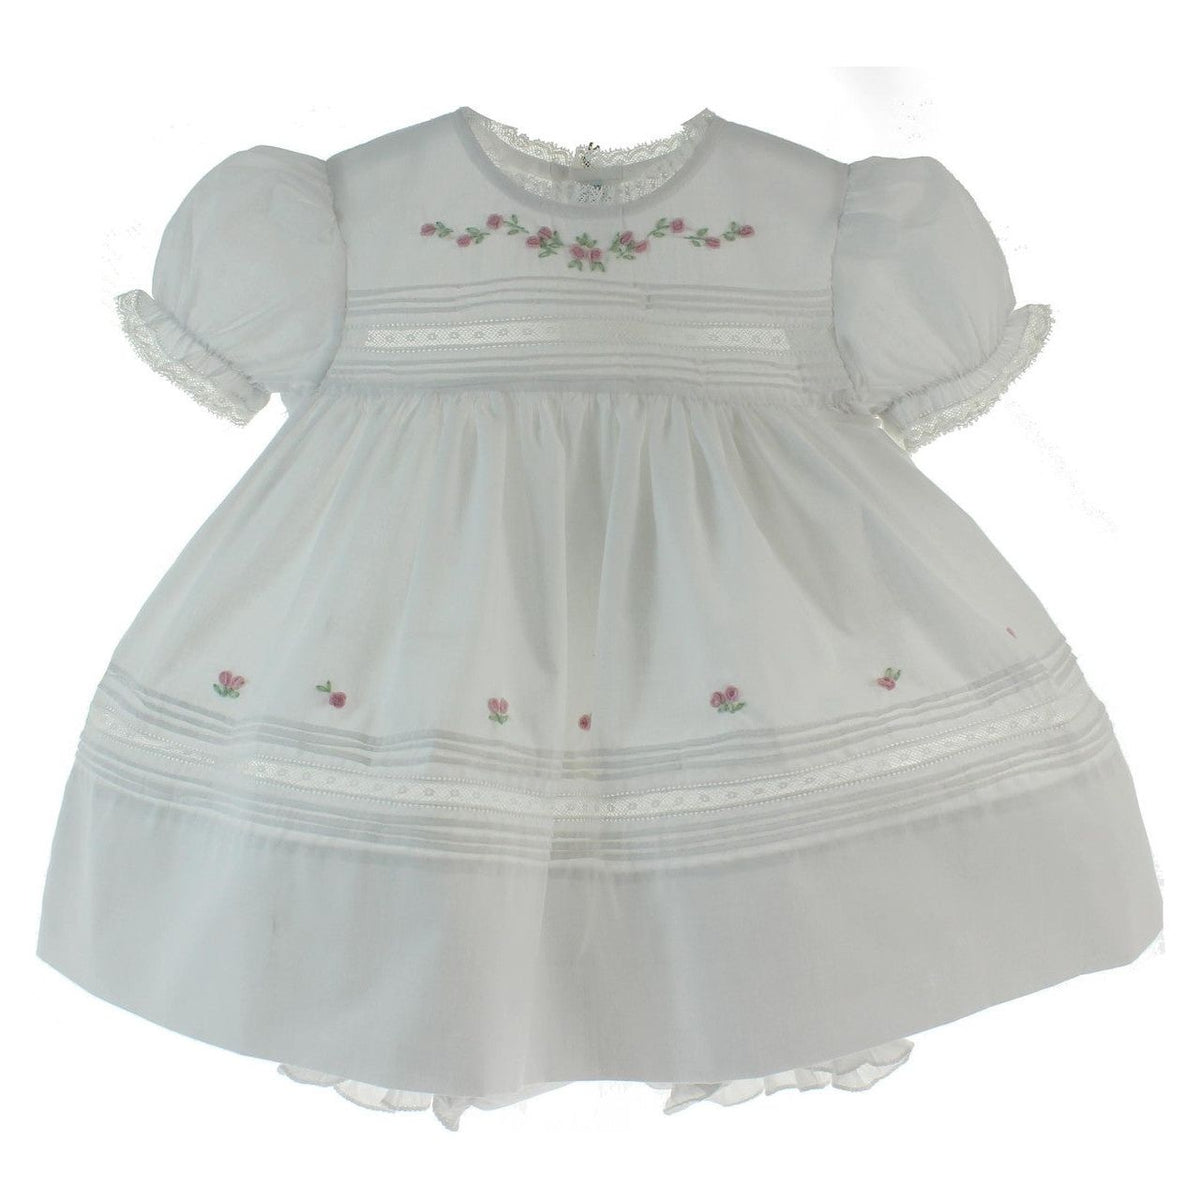 Infant Girls White Heirloom Dress Pink Flowers &amp; Lace